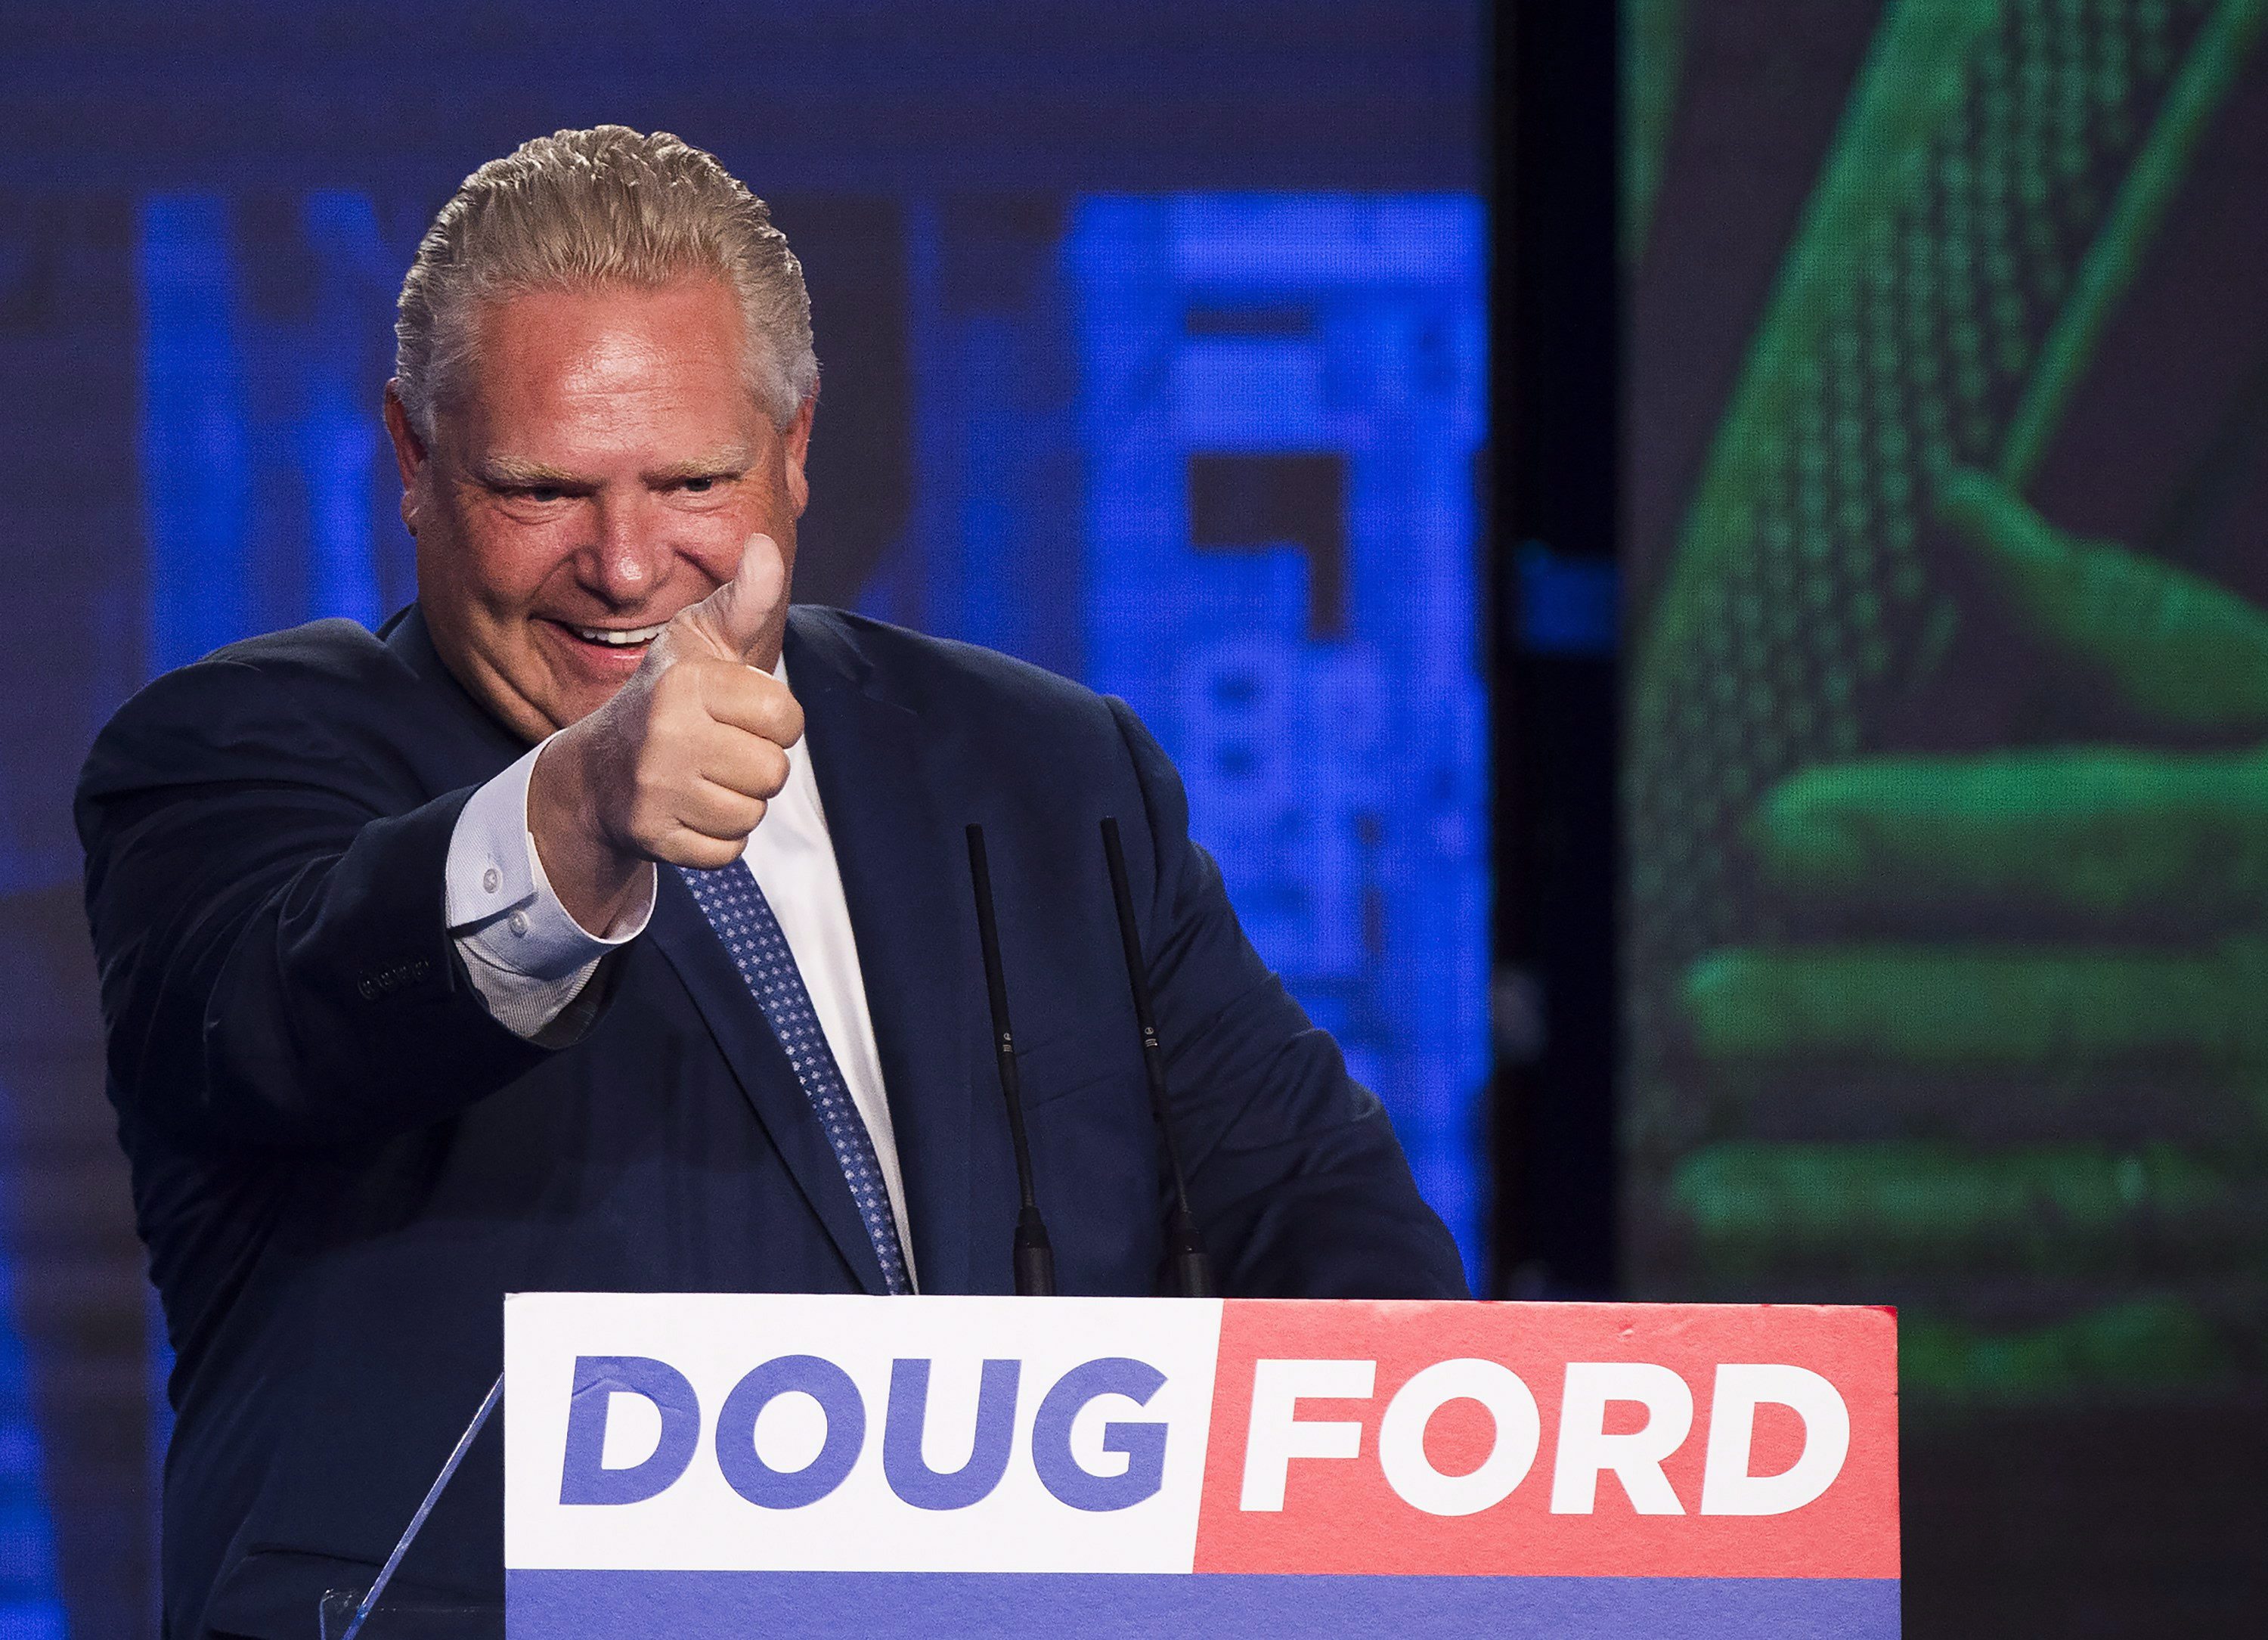 Doug Ford rides populist wave to victory in Ontario, Tories form majority